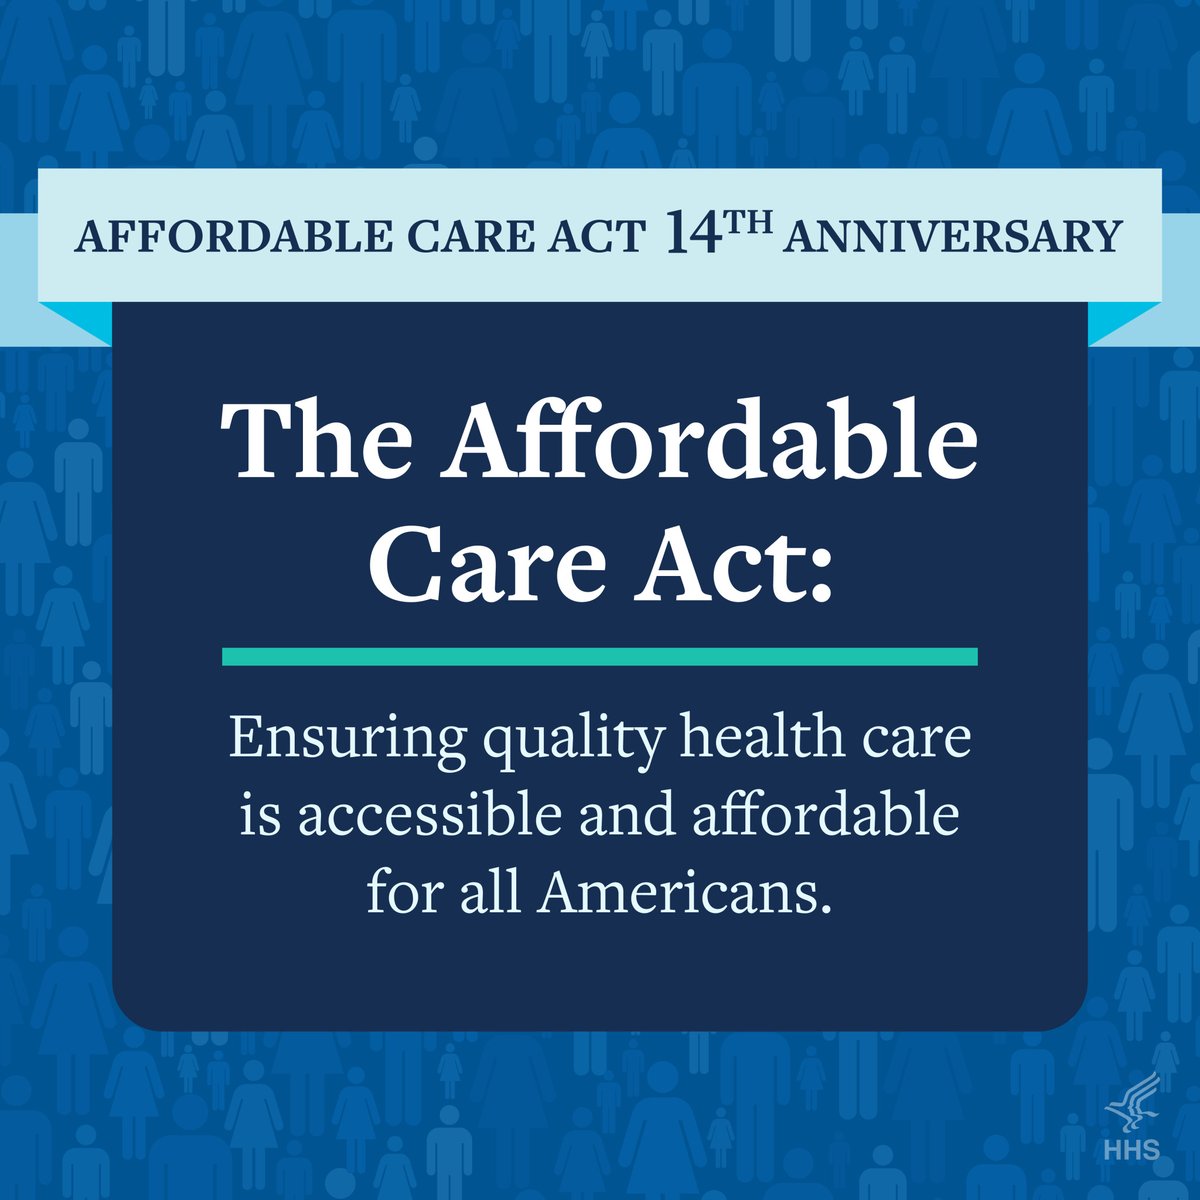 It is the 14th anniversary of the #AffordableCareAct, a historic law that has done so much to increase access to health care and lower costs for all Americans, protecting people with pre-existing conditions, lowering premiums, expanding coverage, and much more. #ACA14